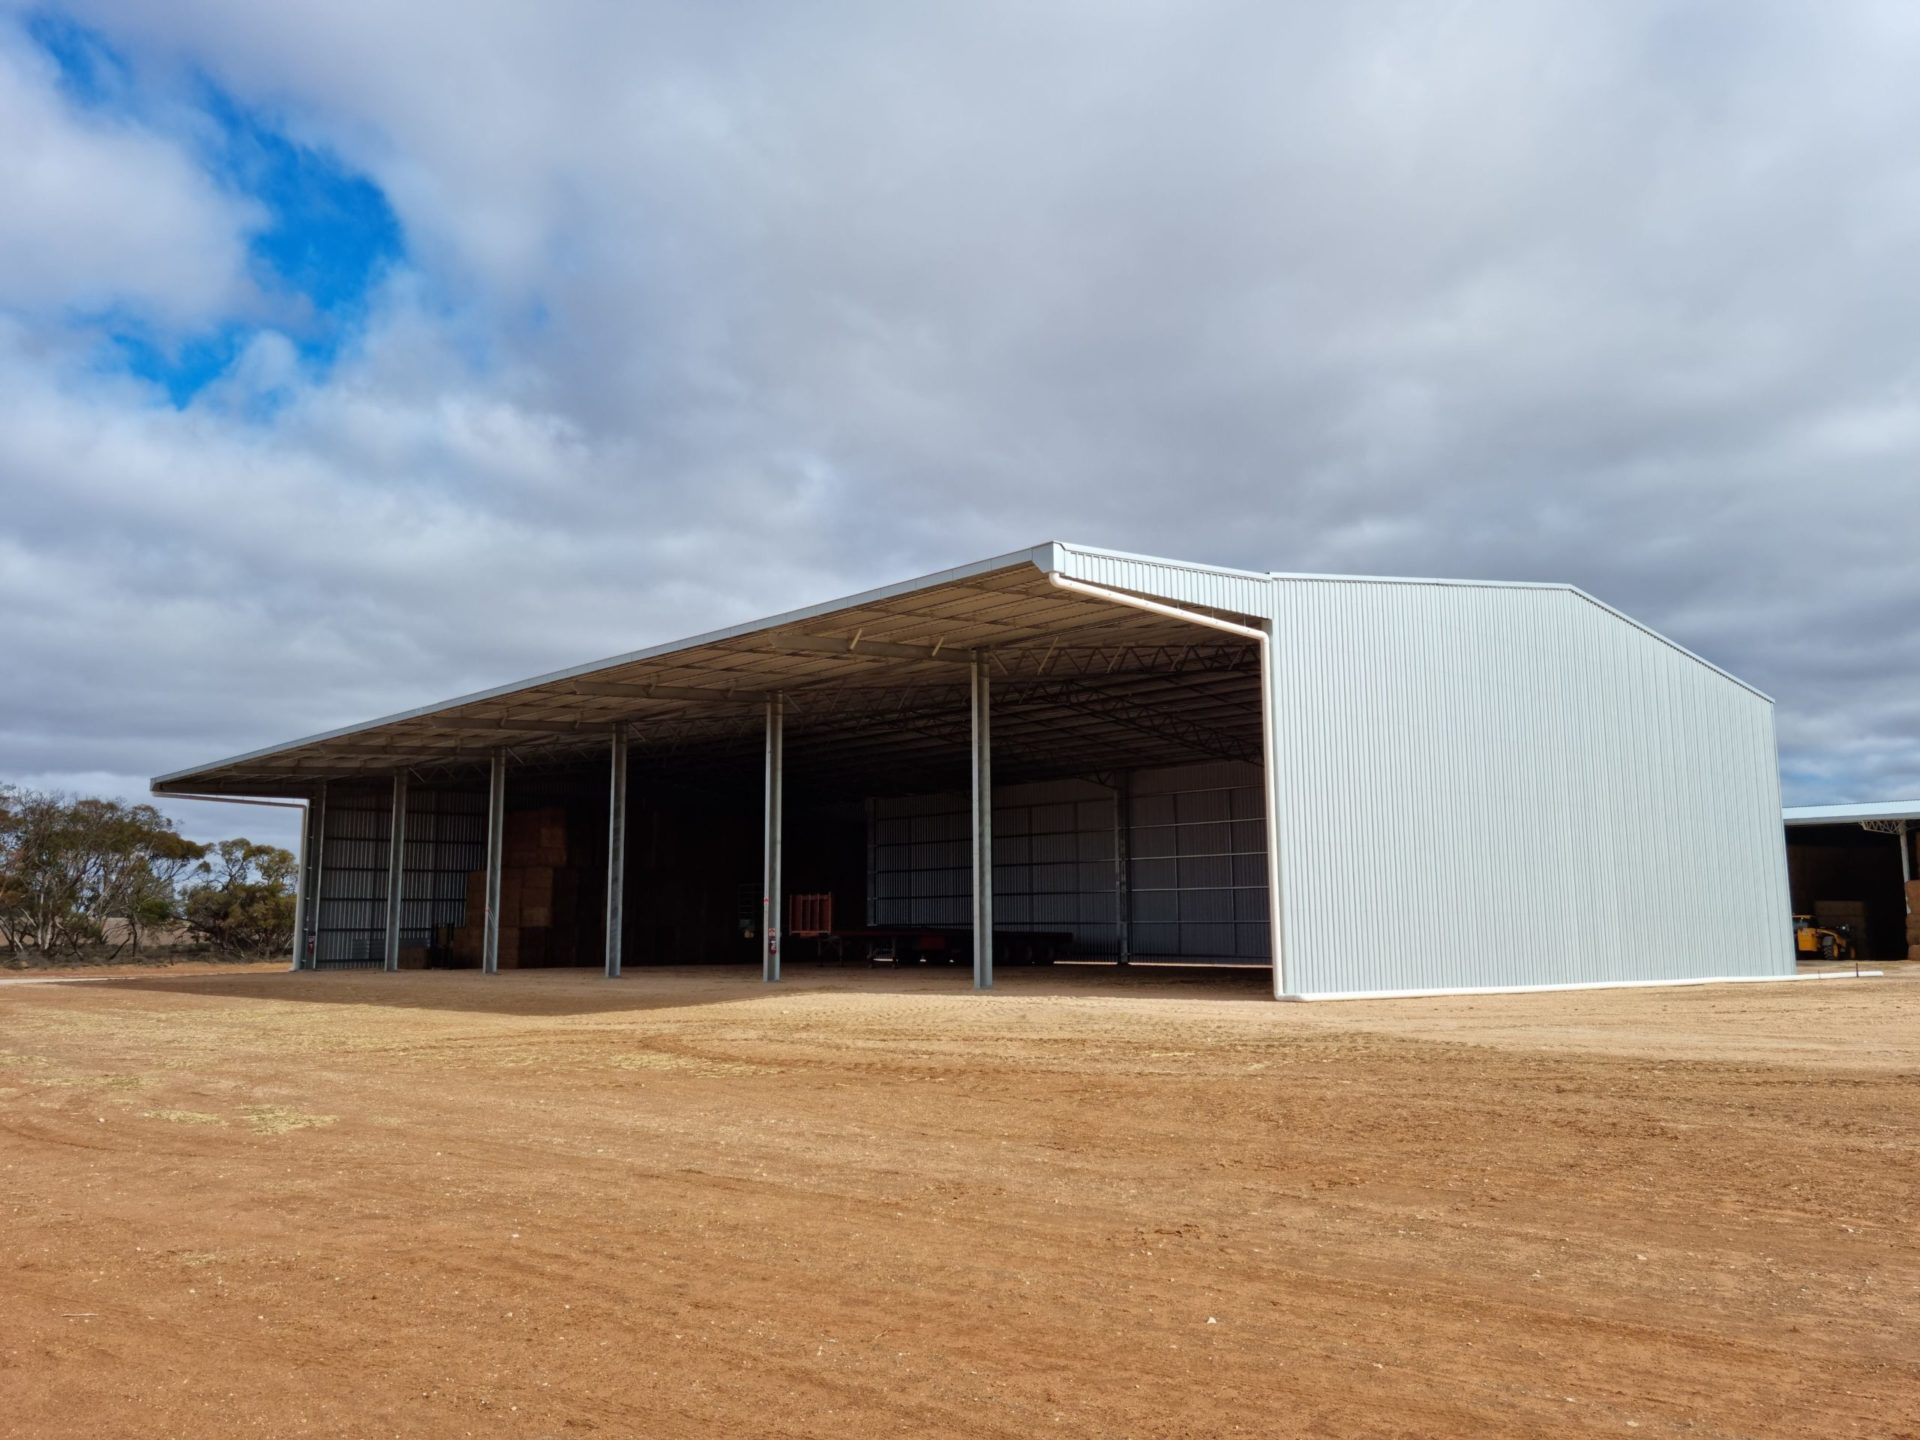 You are currently viewing 49.5m x 24m x 8m open-front hay shed with 6 metre canopy